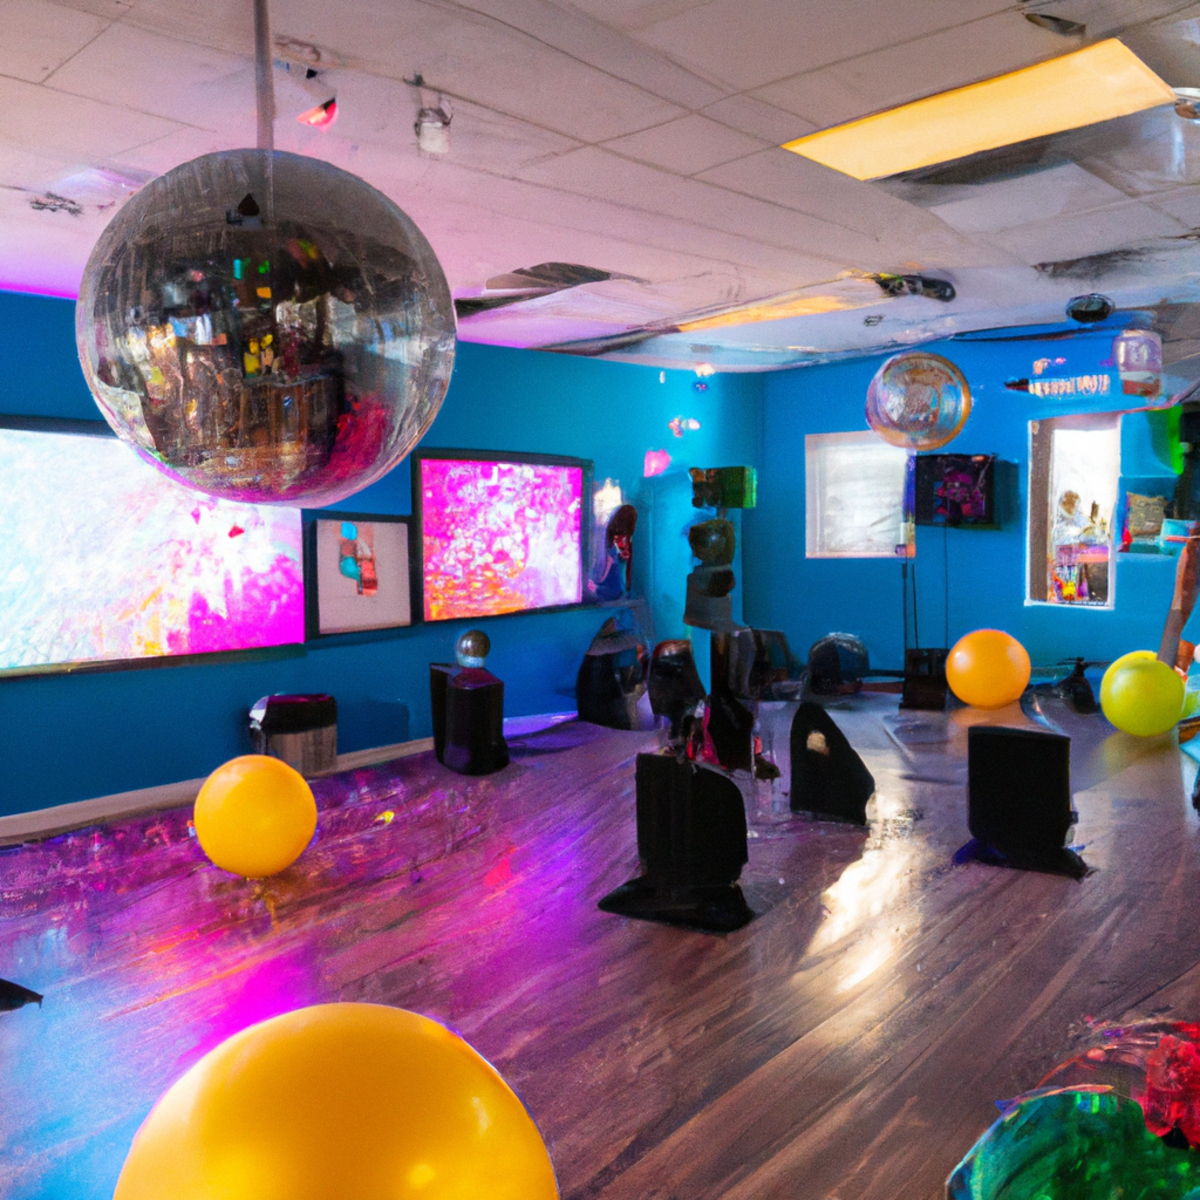 The photo captures a vibrant and energetic scene of a virtual fitness party class. The focus is on the objects in the room, which include a colorful disco ball hanging from the ceiling, a sleek sound system with powerful speakers, and a large screen displaying the virtual instructor leading the dance workout. In the foreground, there are a variety of fitness props such as resistance bands, weights, and yoga mats, indicating that this class offers a well-rounded workout. The participants in the class are not visible in the photo, but their presence is felt through the lively atmosphere and the movement of the objects in the room. Overall, the photo conveys the excitement and fun of a virtual fitness party class, encouraging readers to join in and dance their way to fitness.